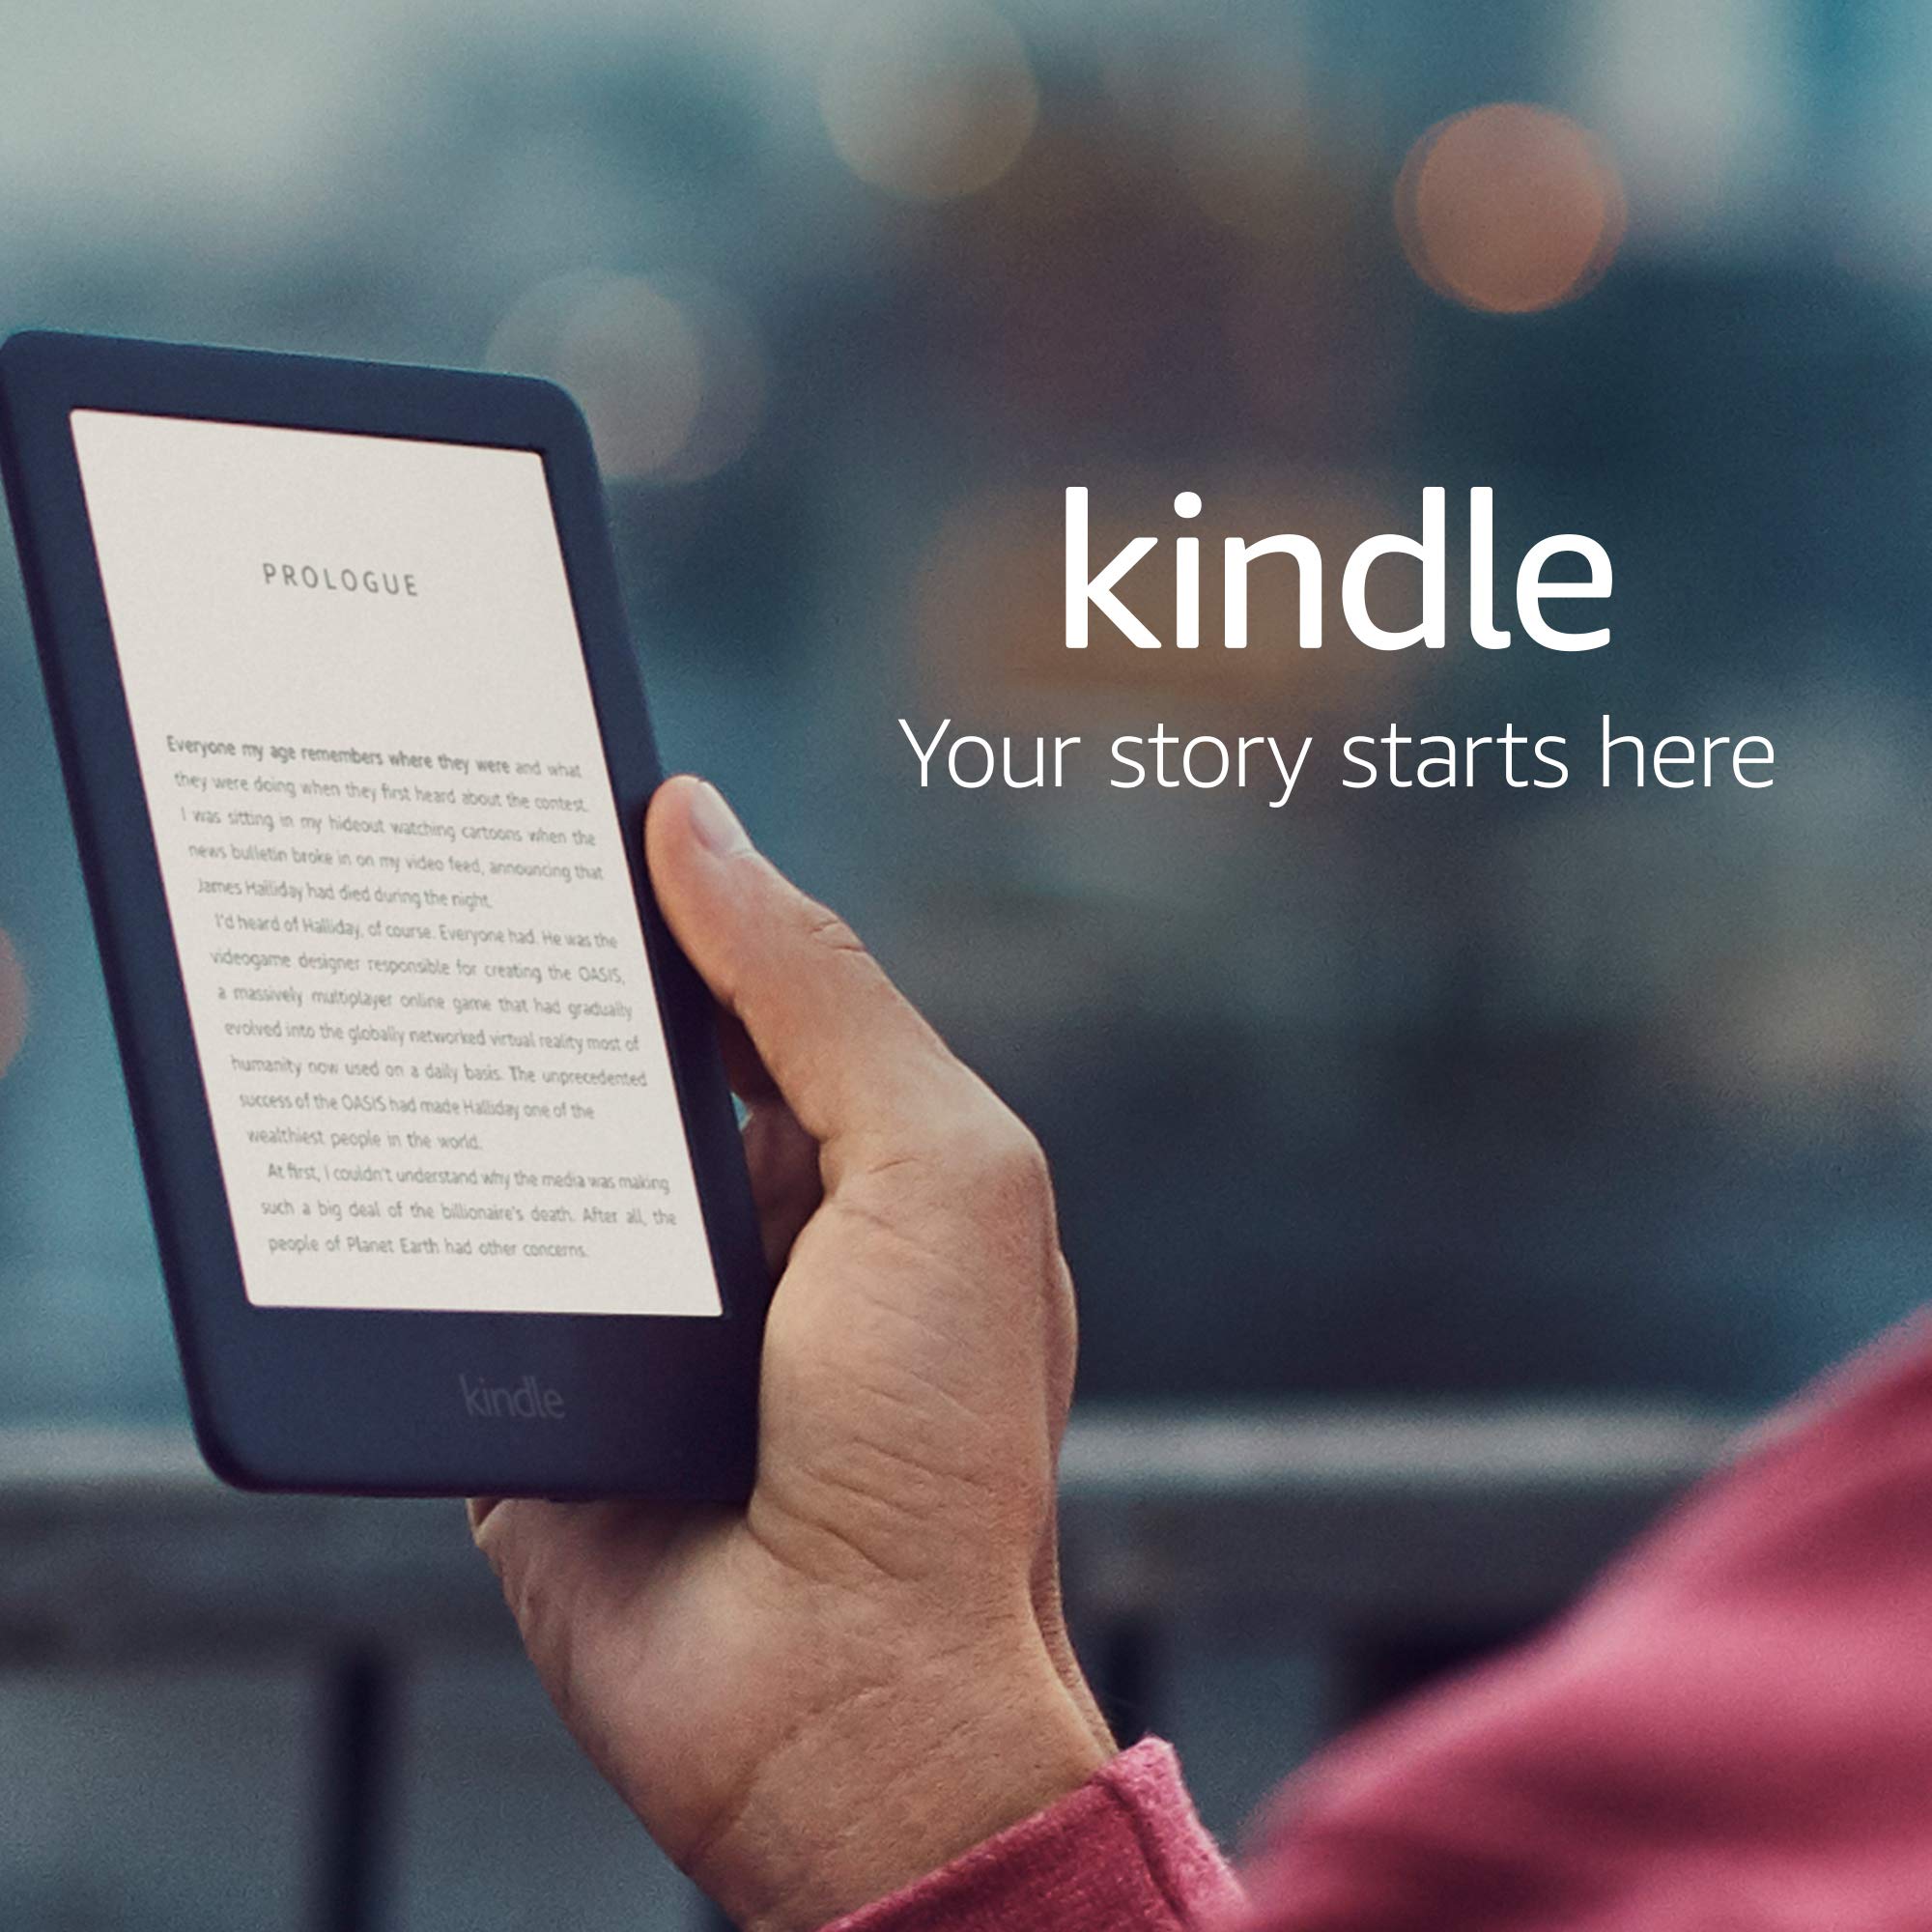 All-new Kindle - Now with a Built-in Front Light - Black - Includes Special Offers